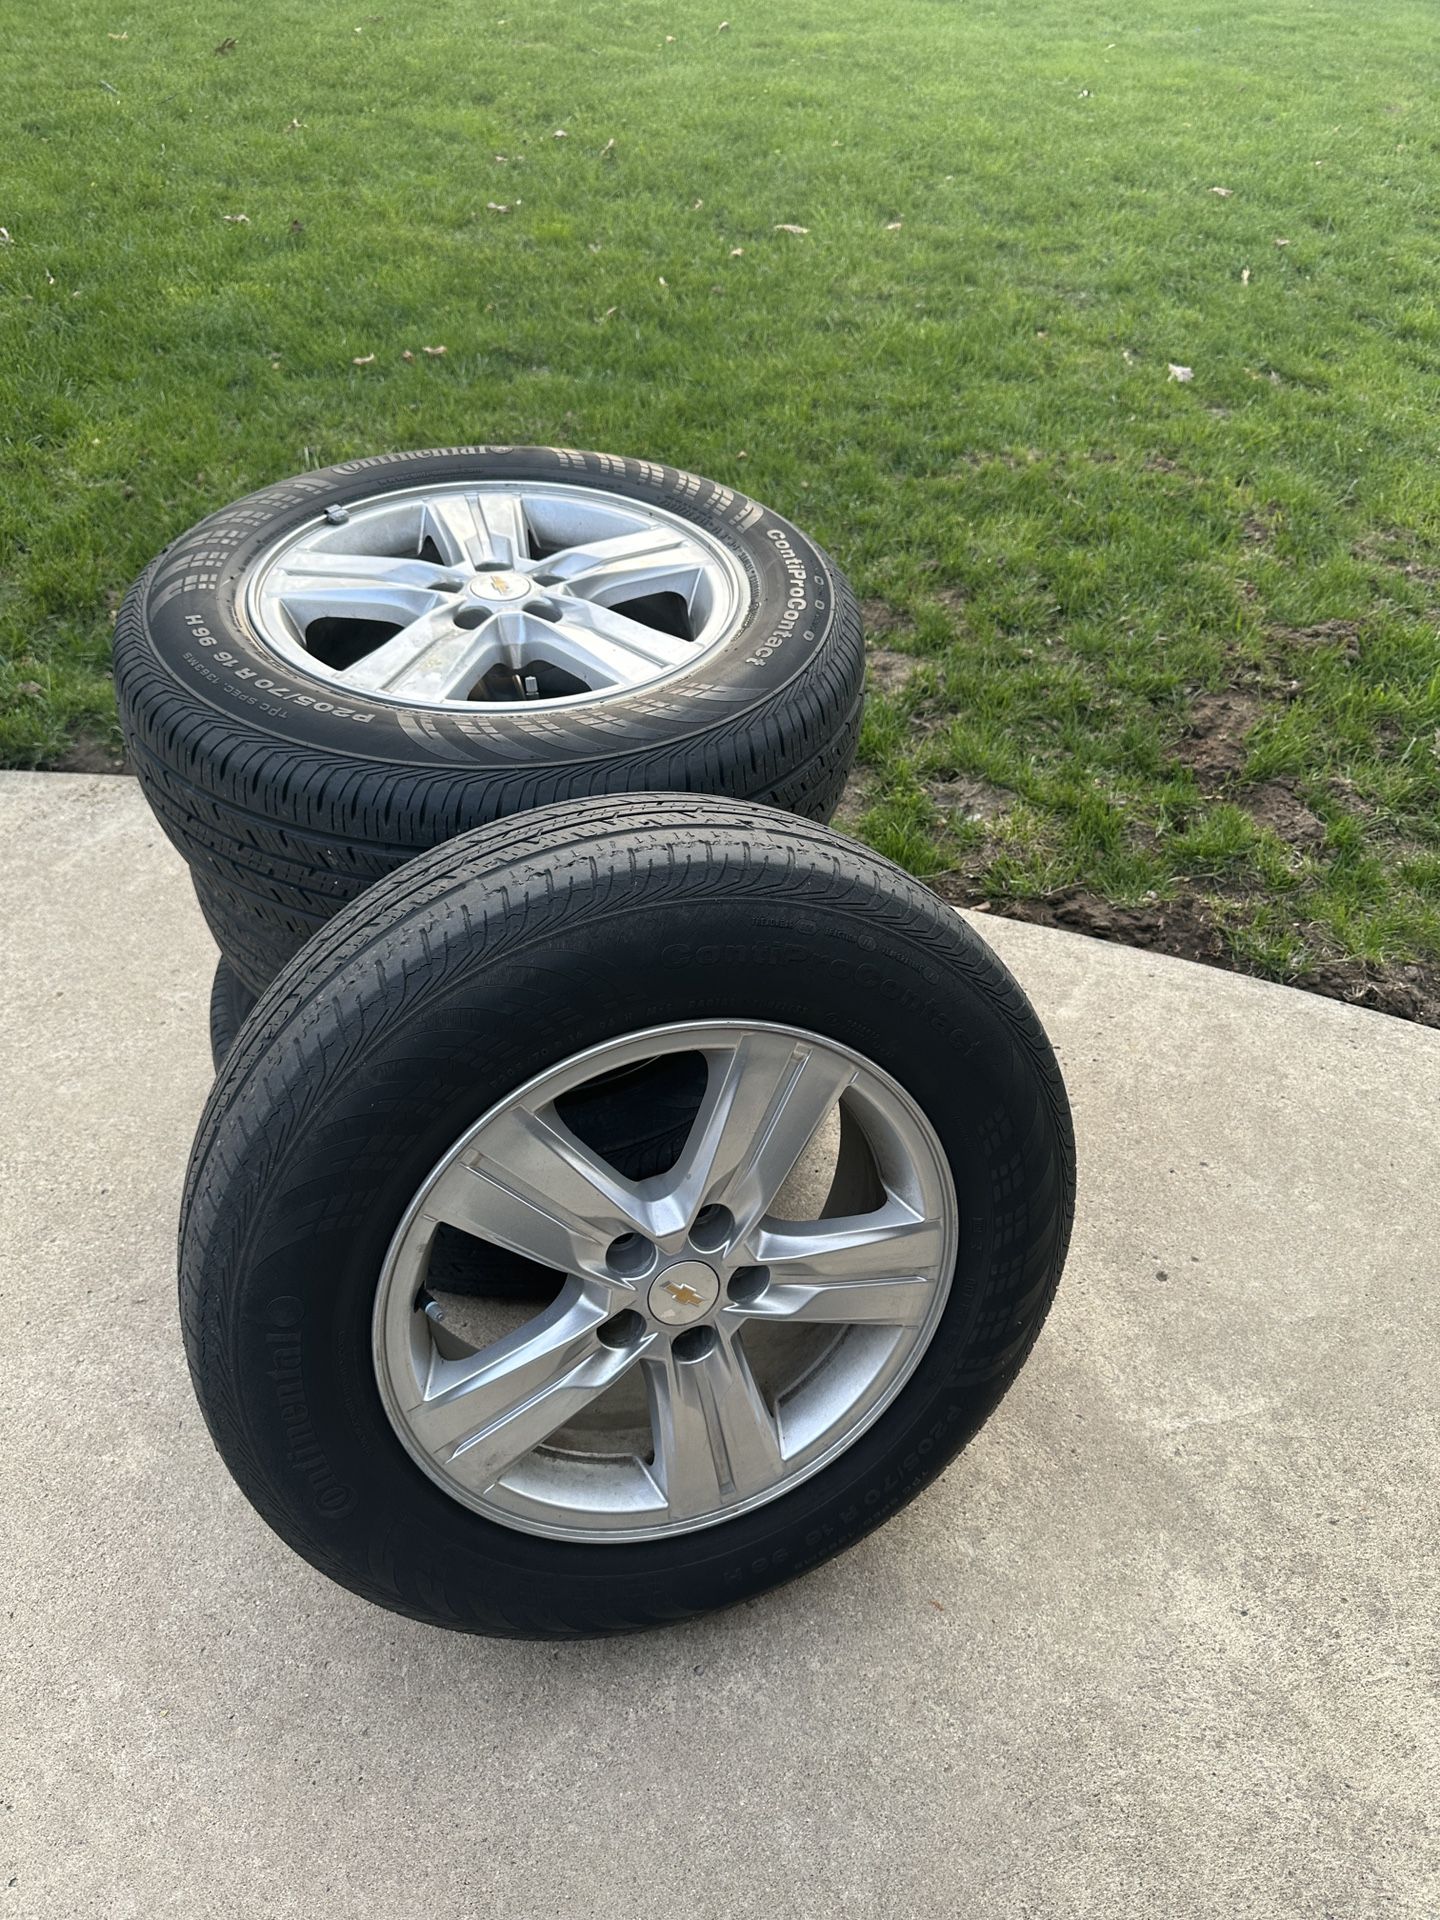 4 Used 16 Inch Wheels & Tires